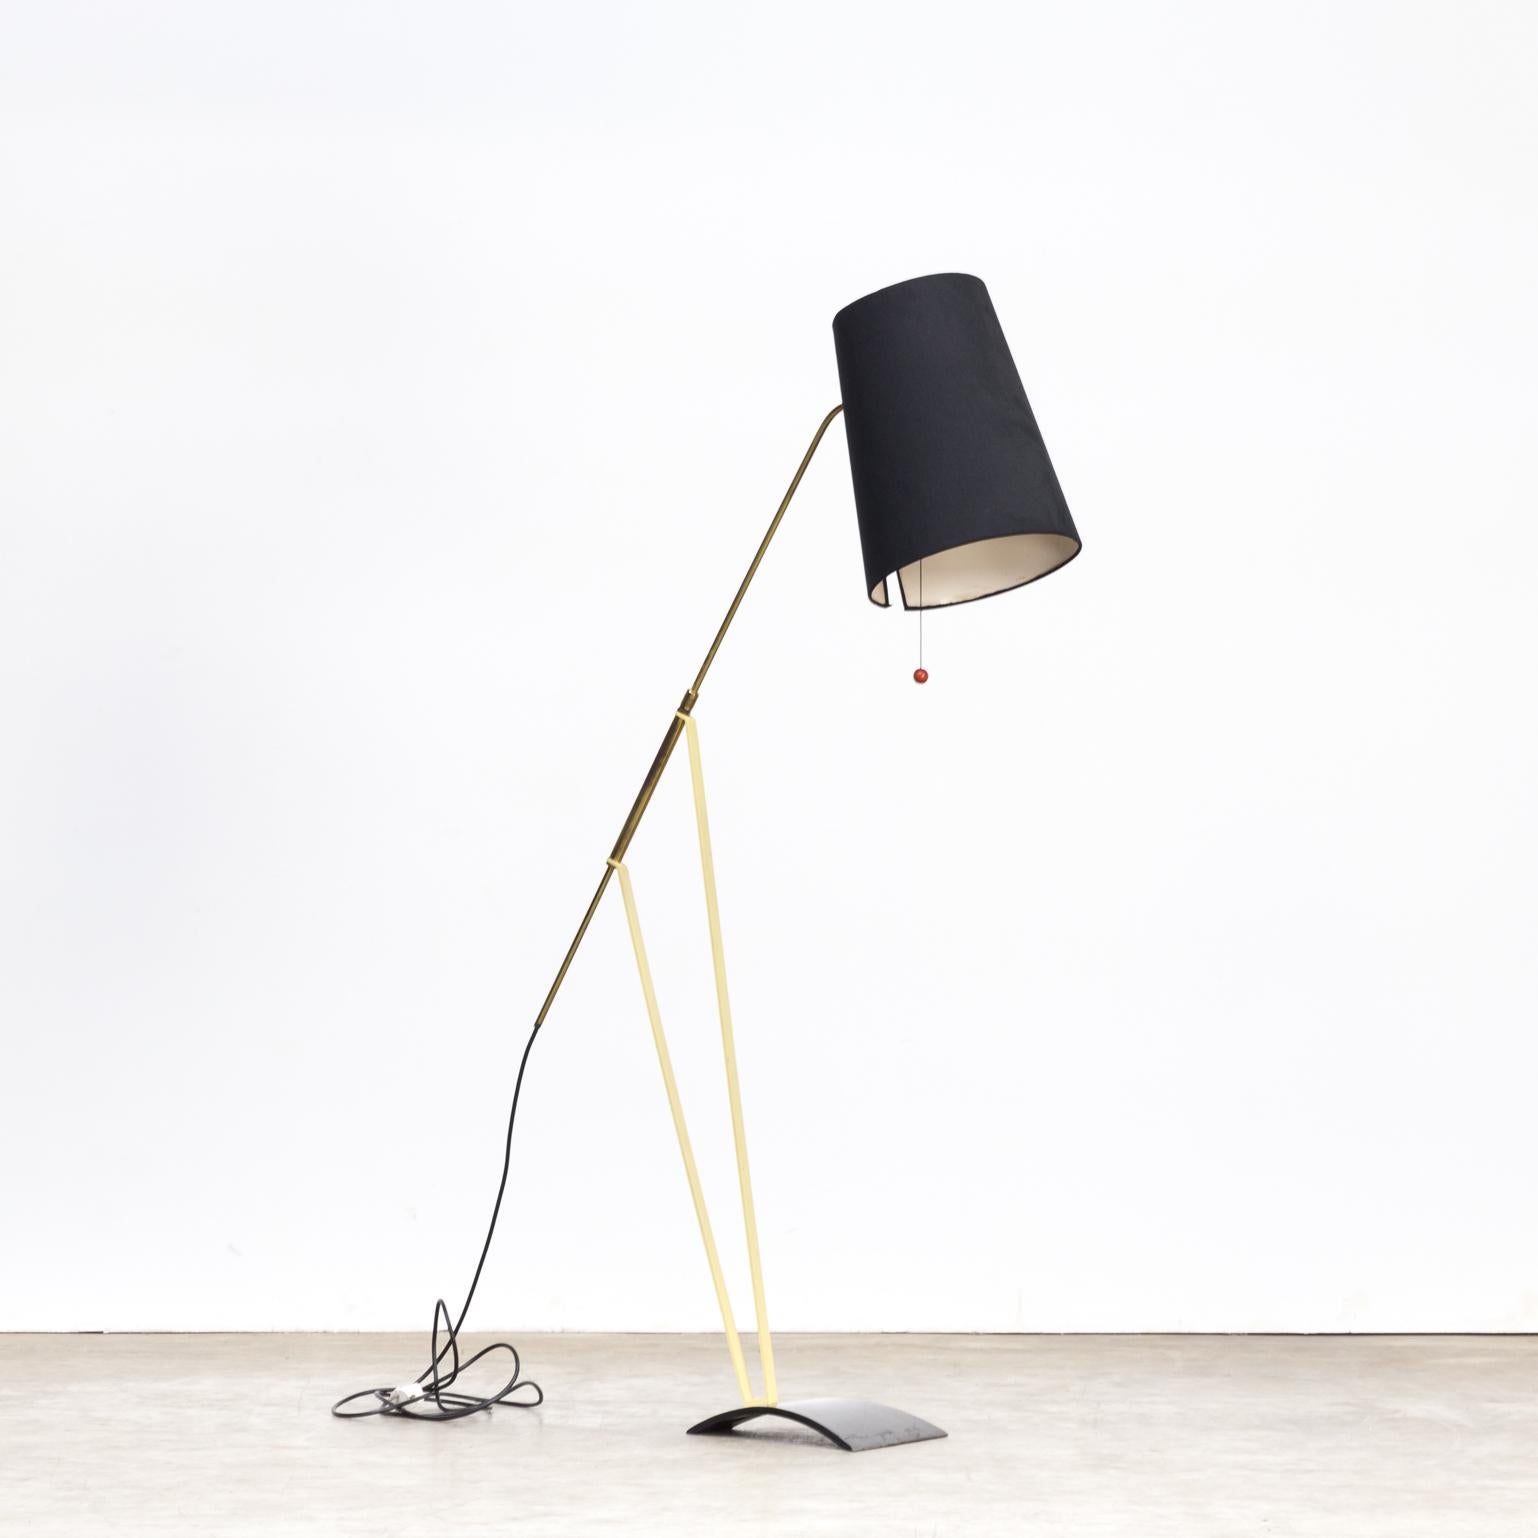 Mid-20th Century 1950s Hans Bergström Floor Lamp with Adjustable Fabric Shade for Ateljé Lyktan For Sale